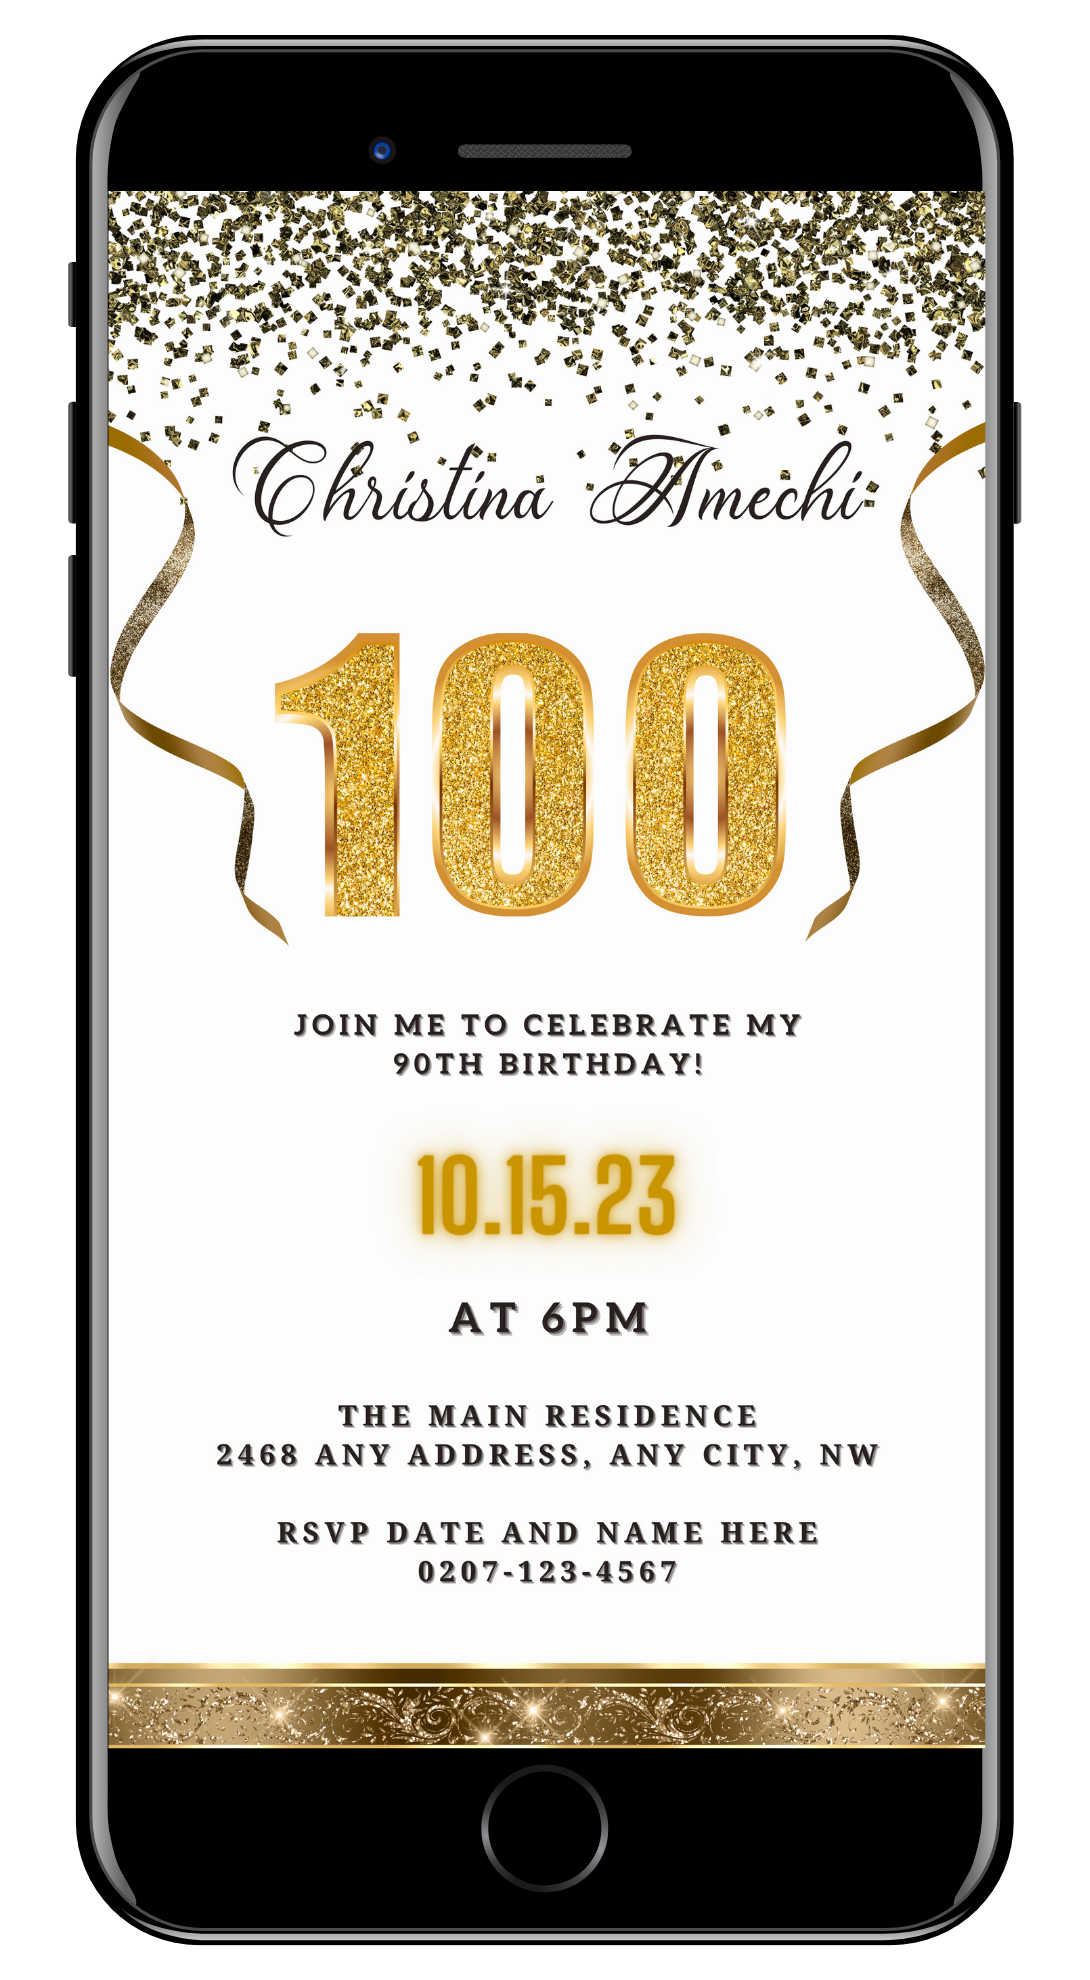 Customizable White Gold Confetti 100th Birthday Evite, featuring a smartphone with gold text and ribbons, ideal for digital invitations via Text, Email, and WhatsApp.